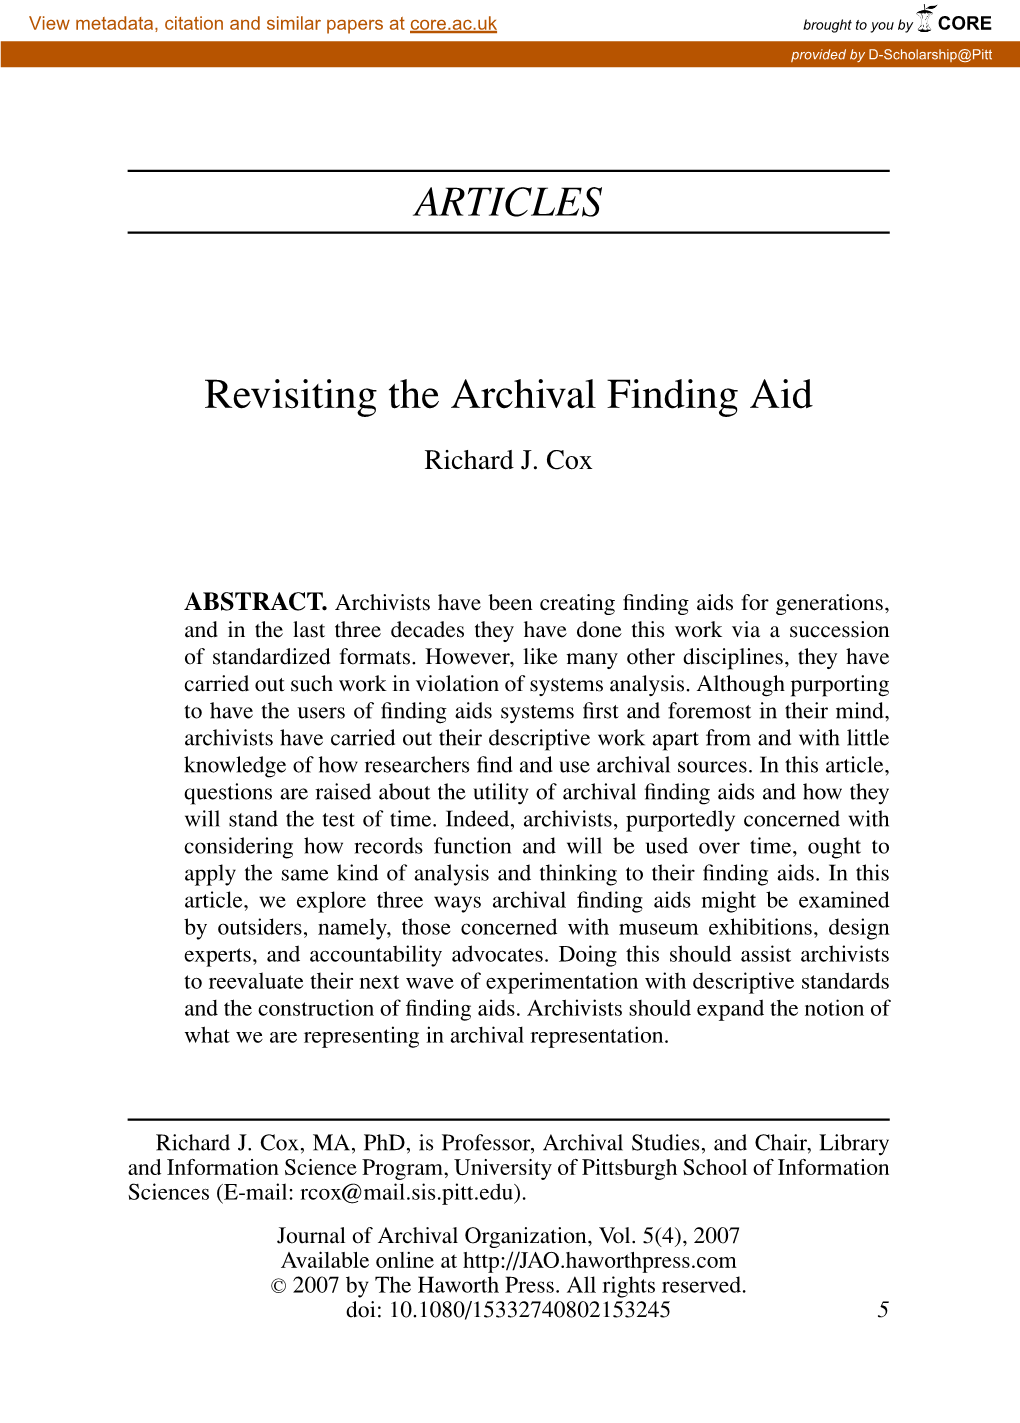 ARTICLES Revisiting the Archival Finding